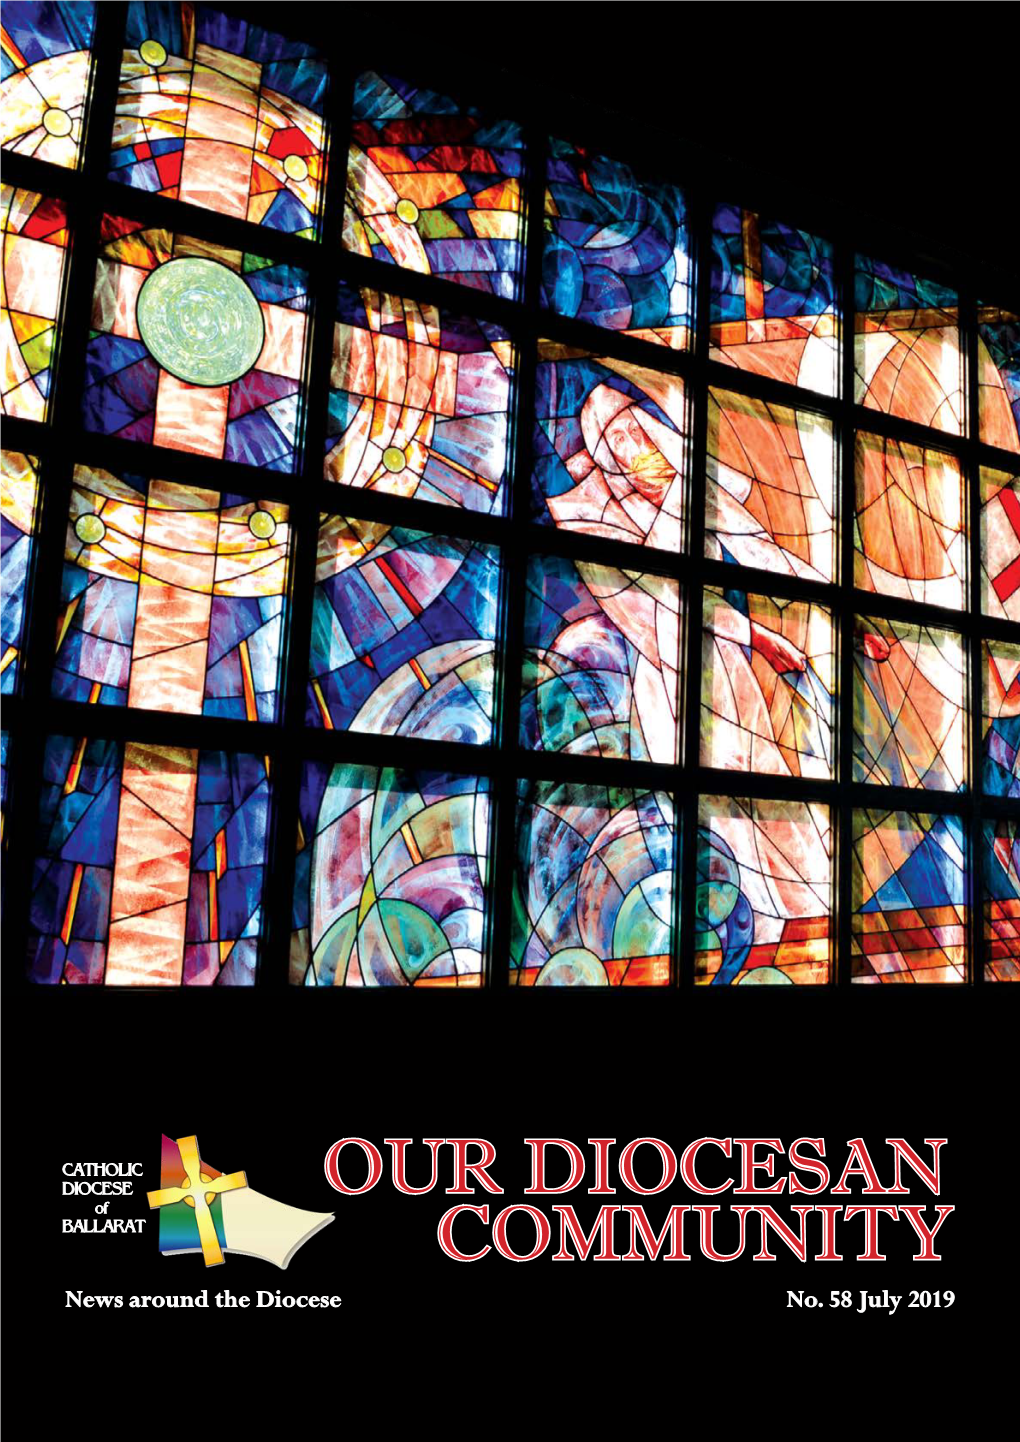 OUR DIOCESAN COMMUNITY (ODC) Growing Number Without Any Religious Affiliation